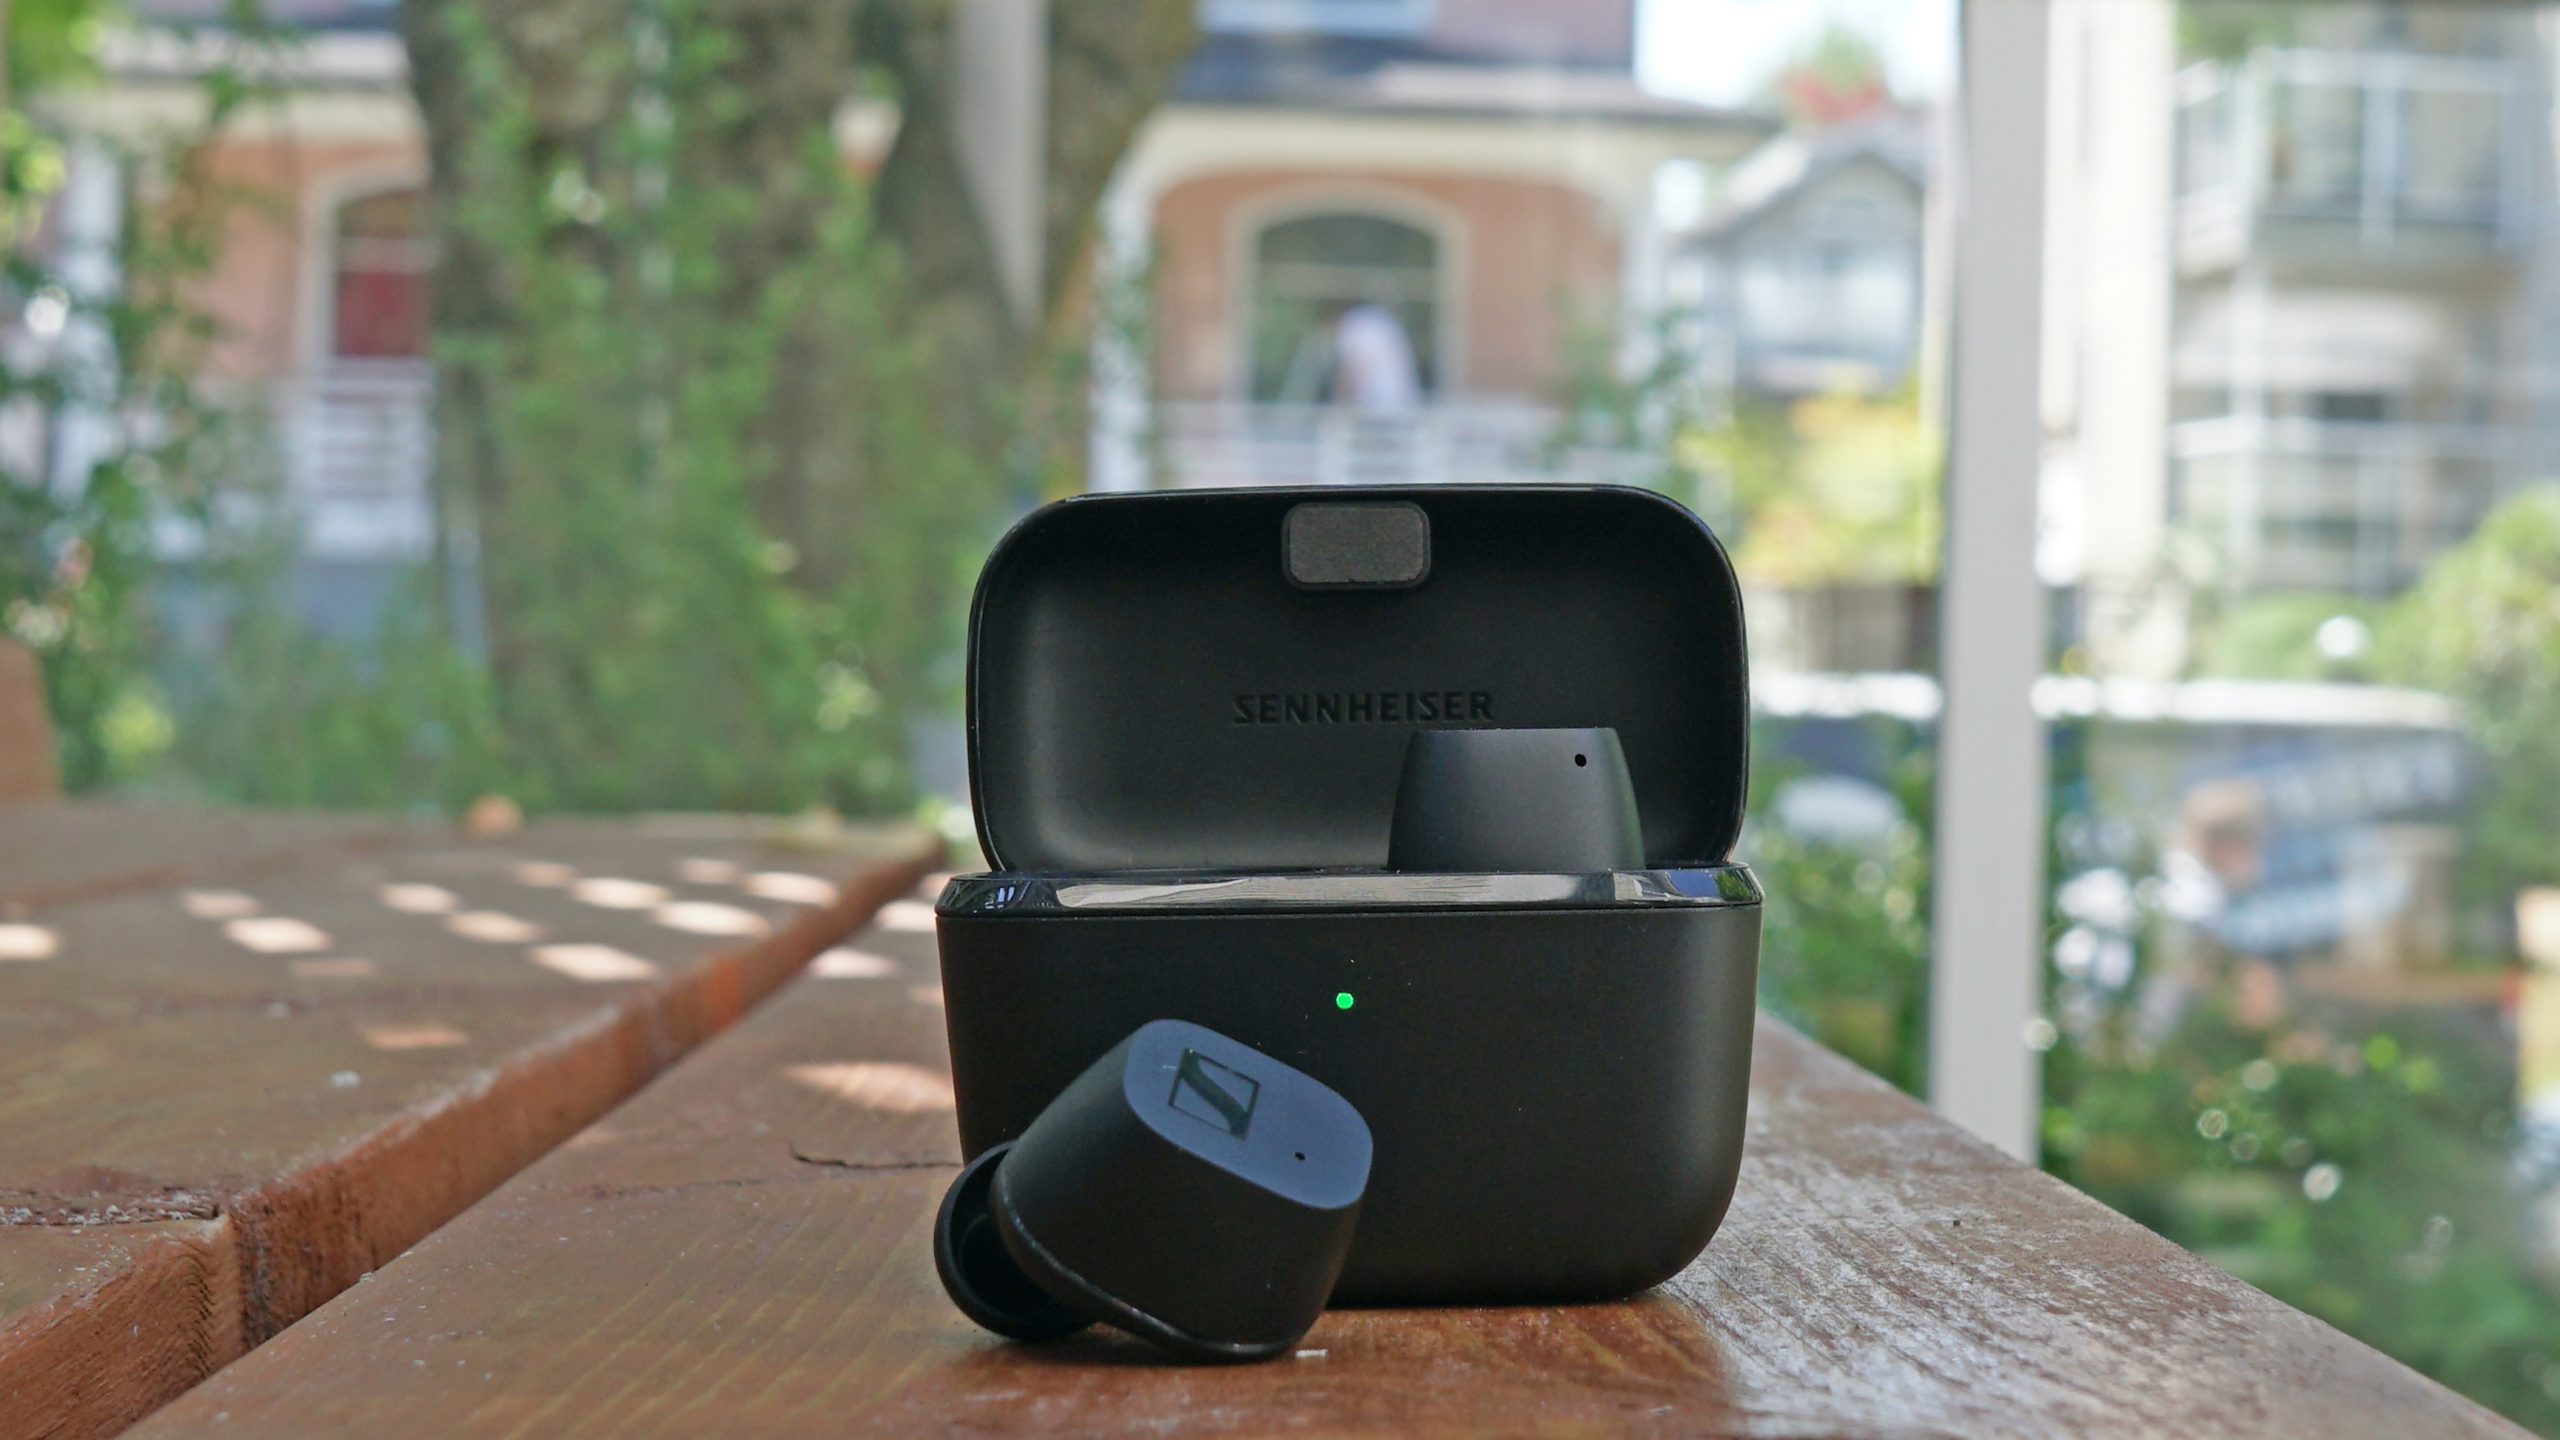 Picture of Sennheiser CX TWS earbuds with a case, placed on an outdoor table.